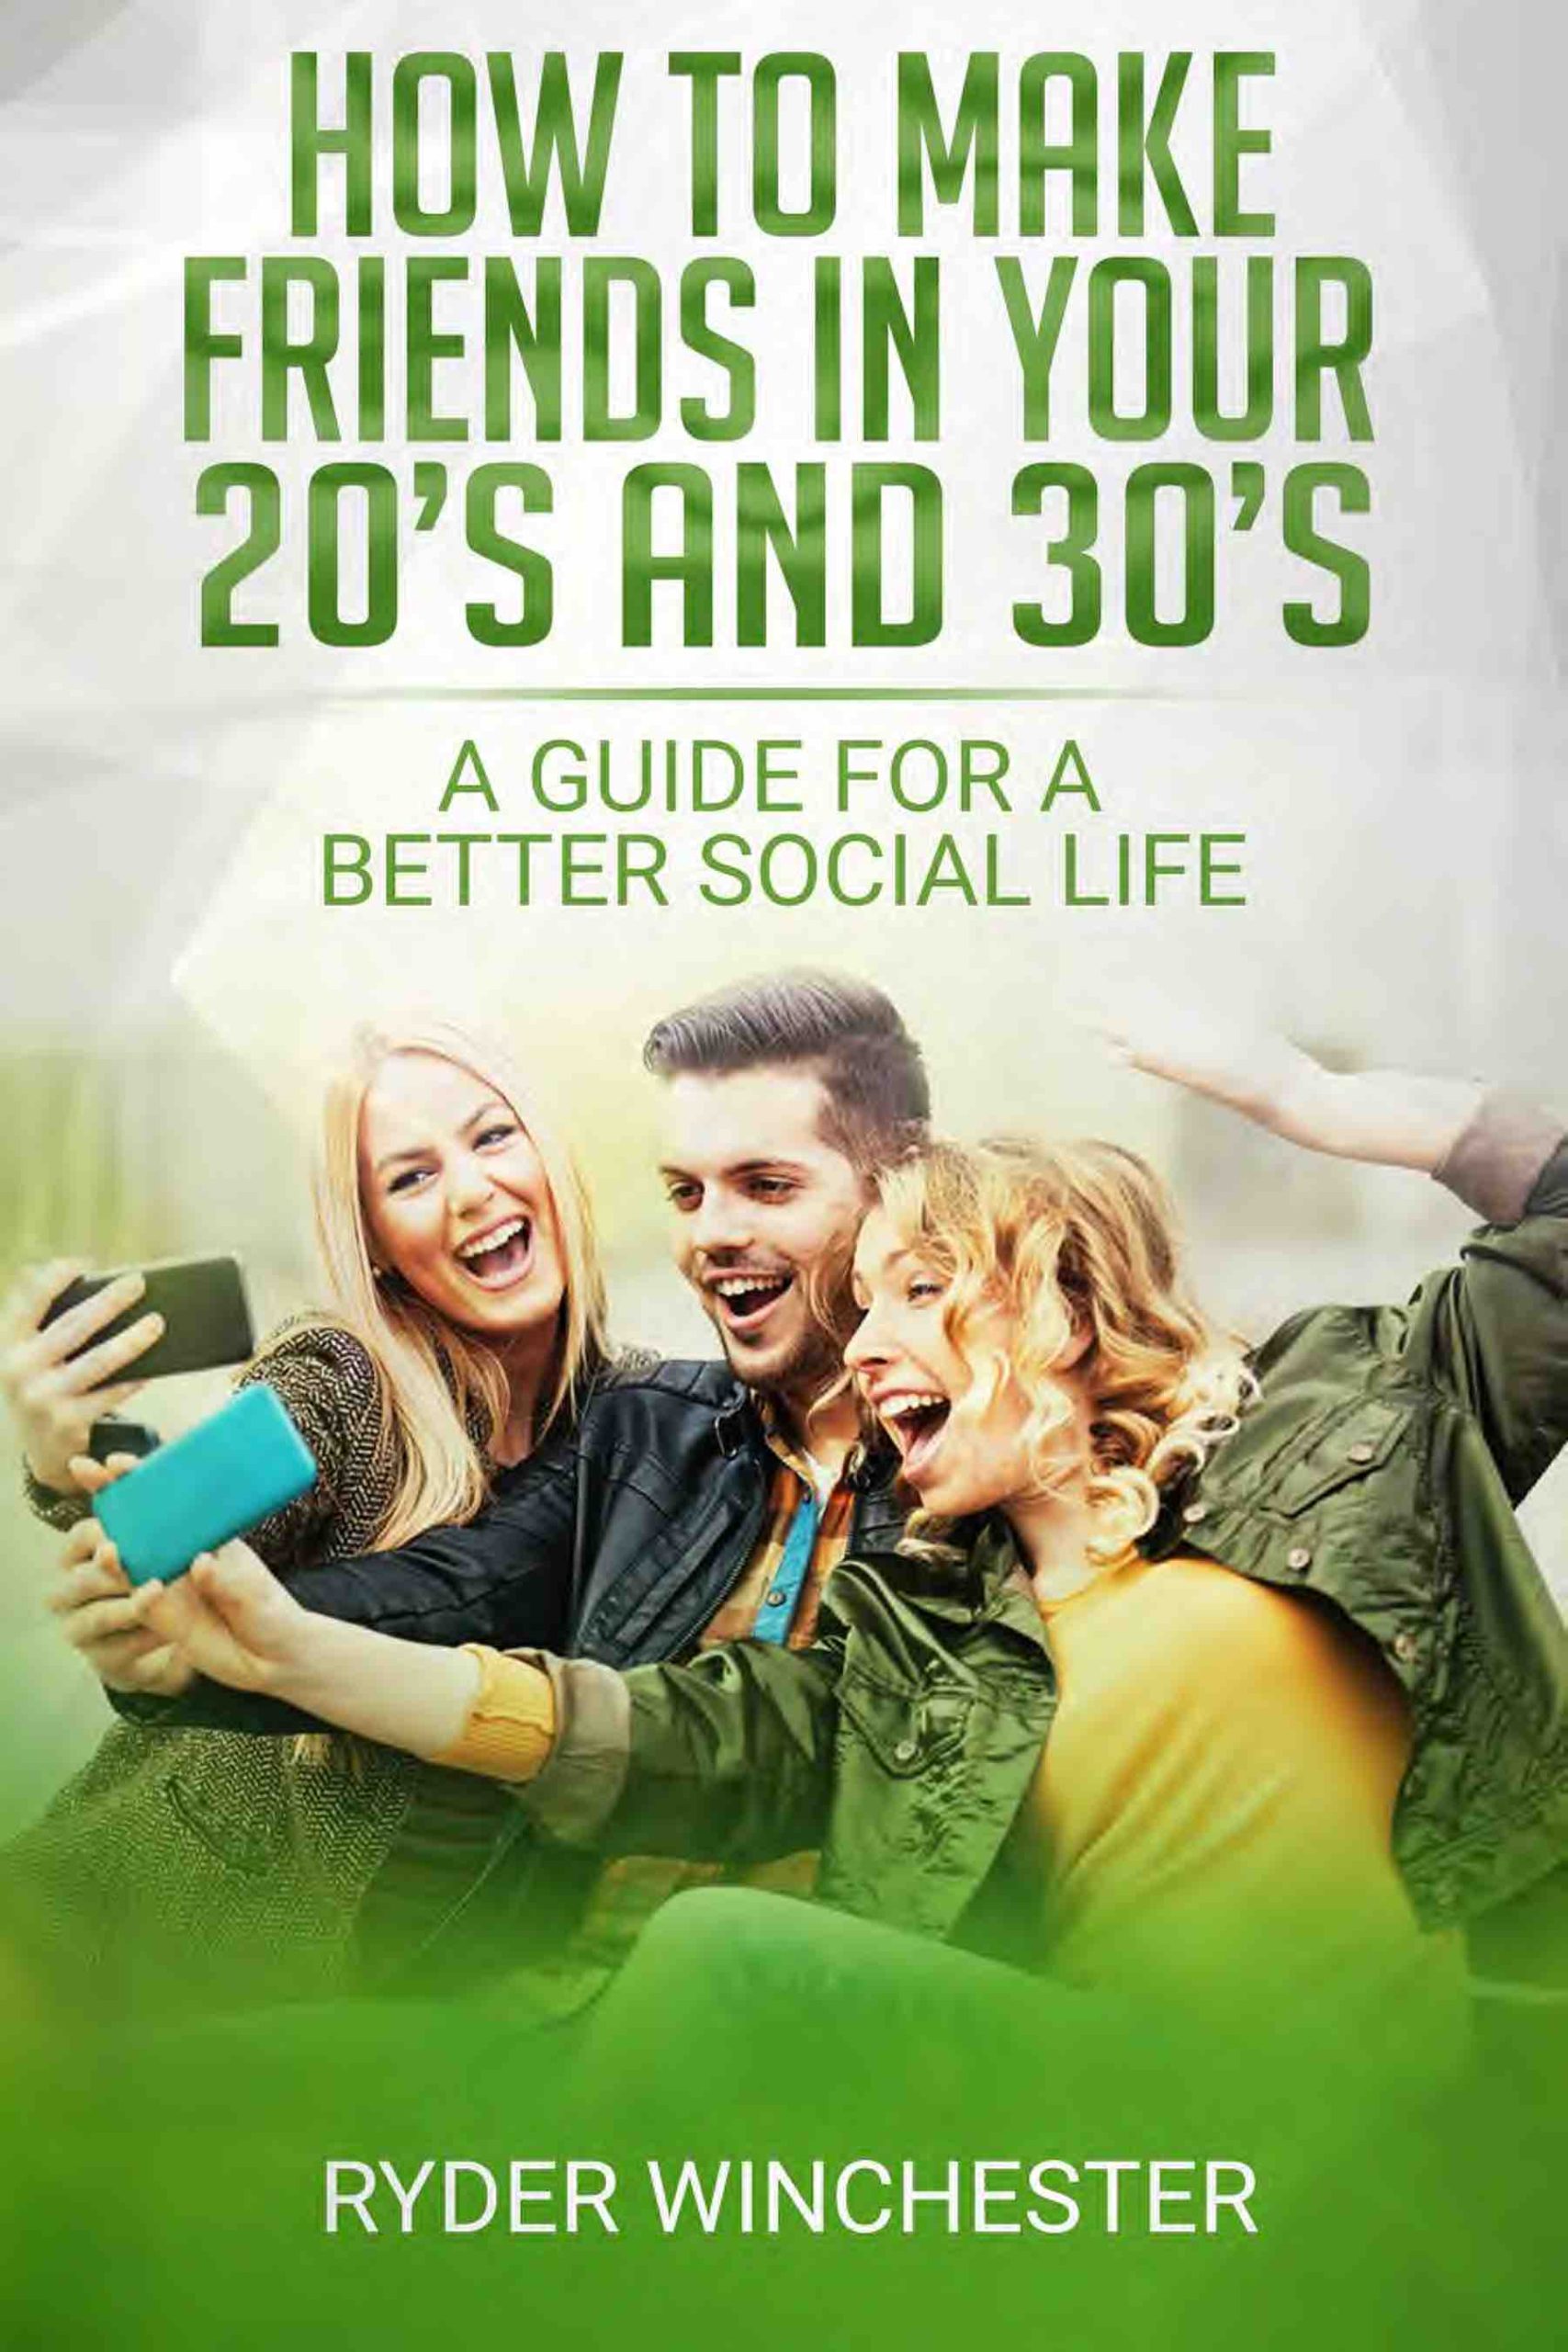 FREE: How To Make Friends In Your 20s and 30s: A Guide For A Better Social Life by Ryder Winchester